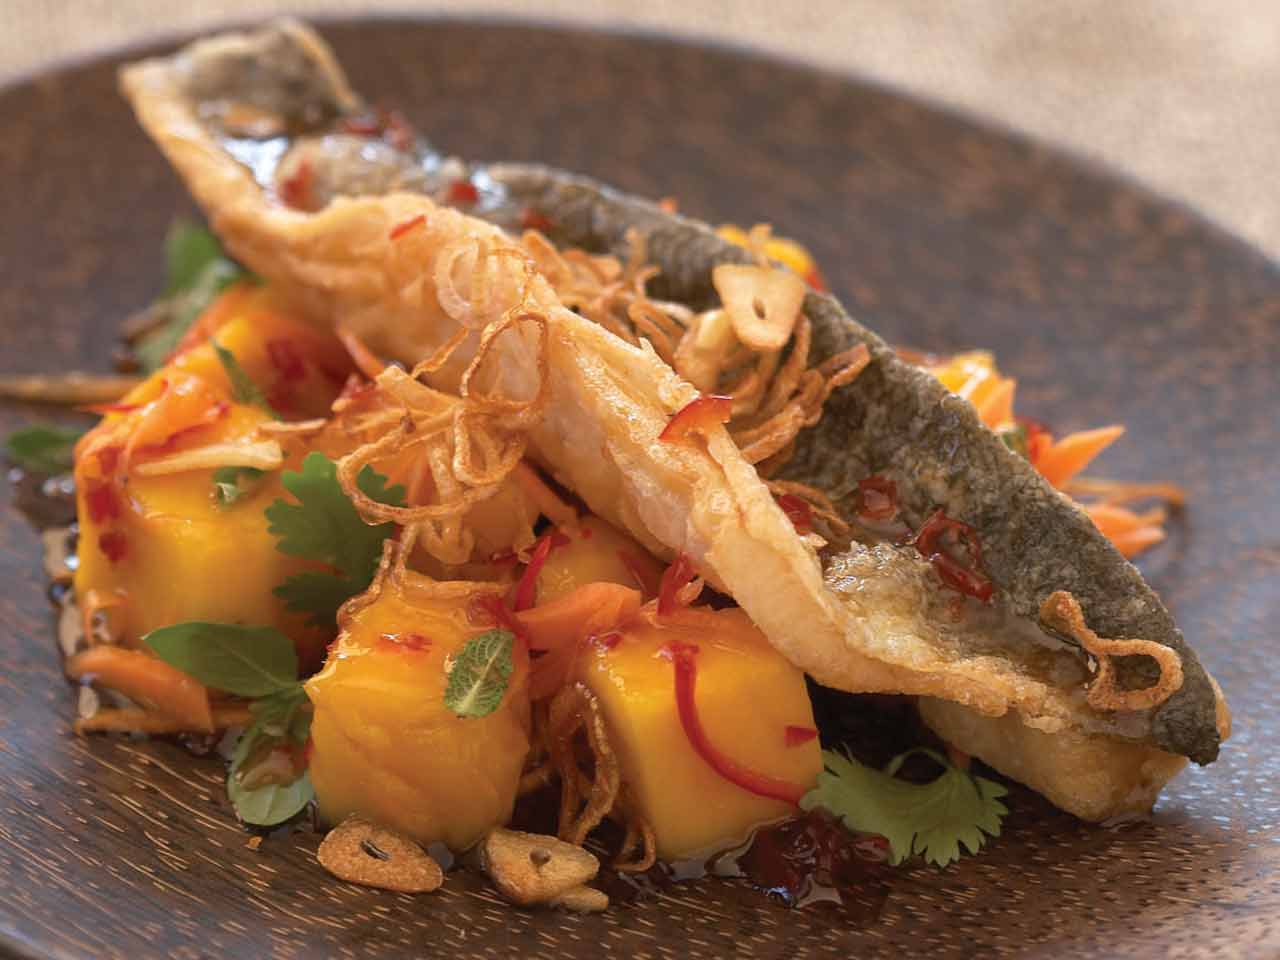 Crisp-fried sea bass in sweet chilli sauce, with mango and mint salad